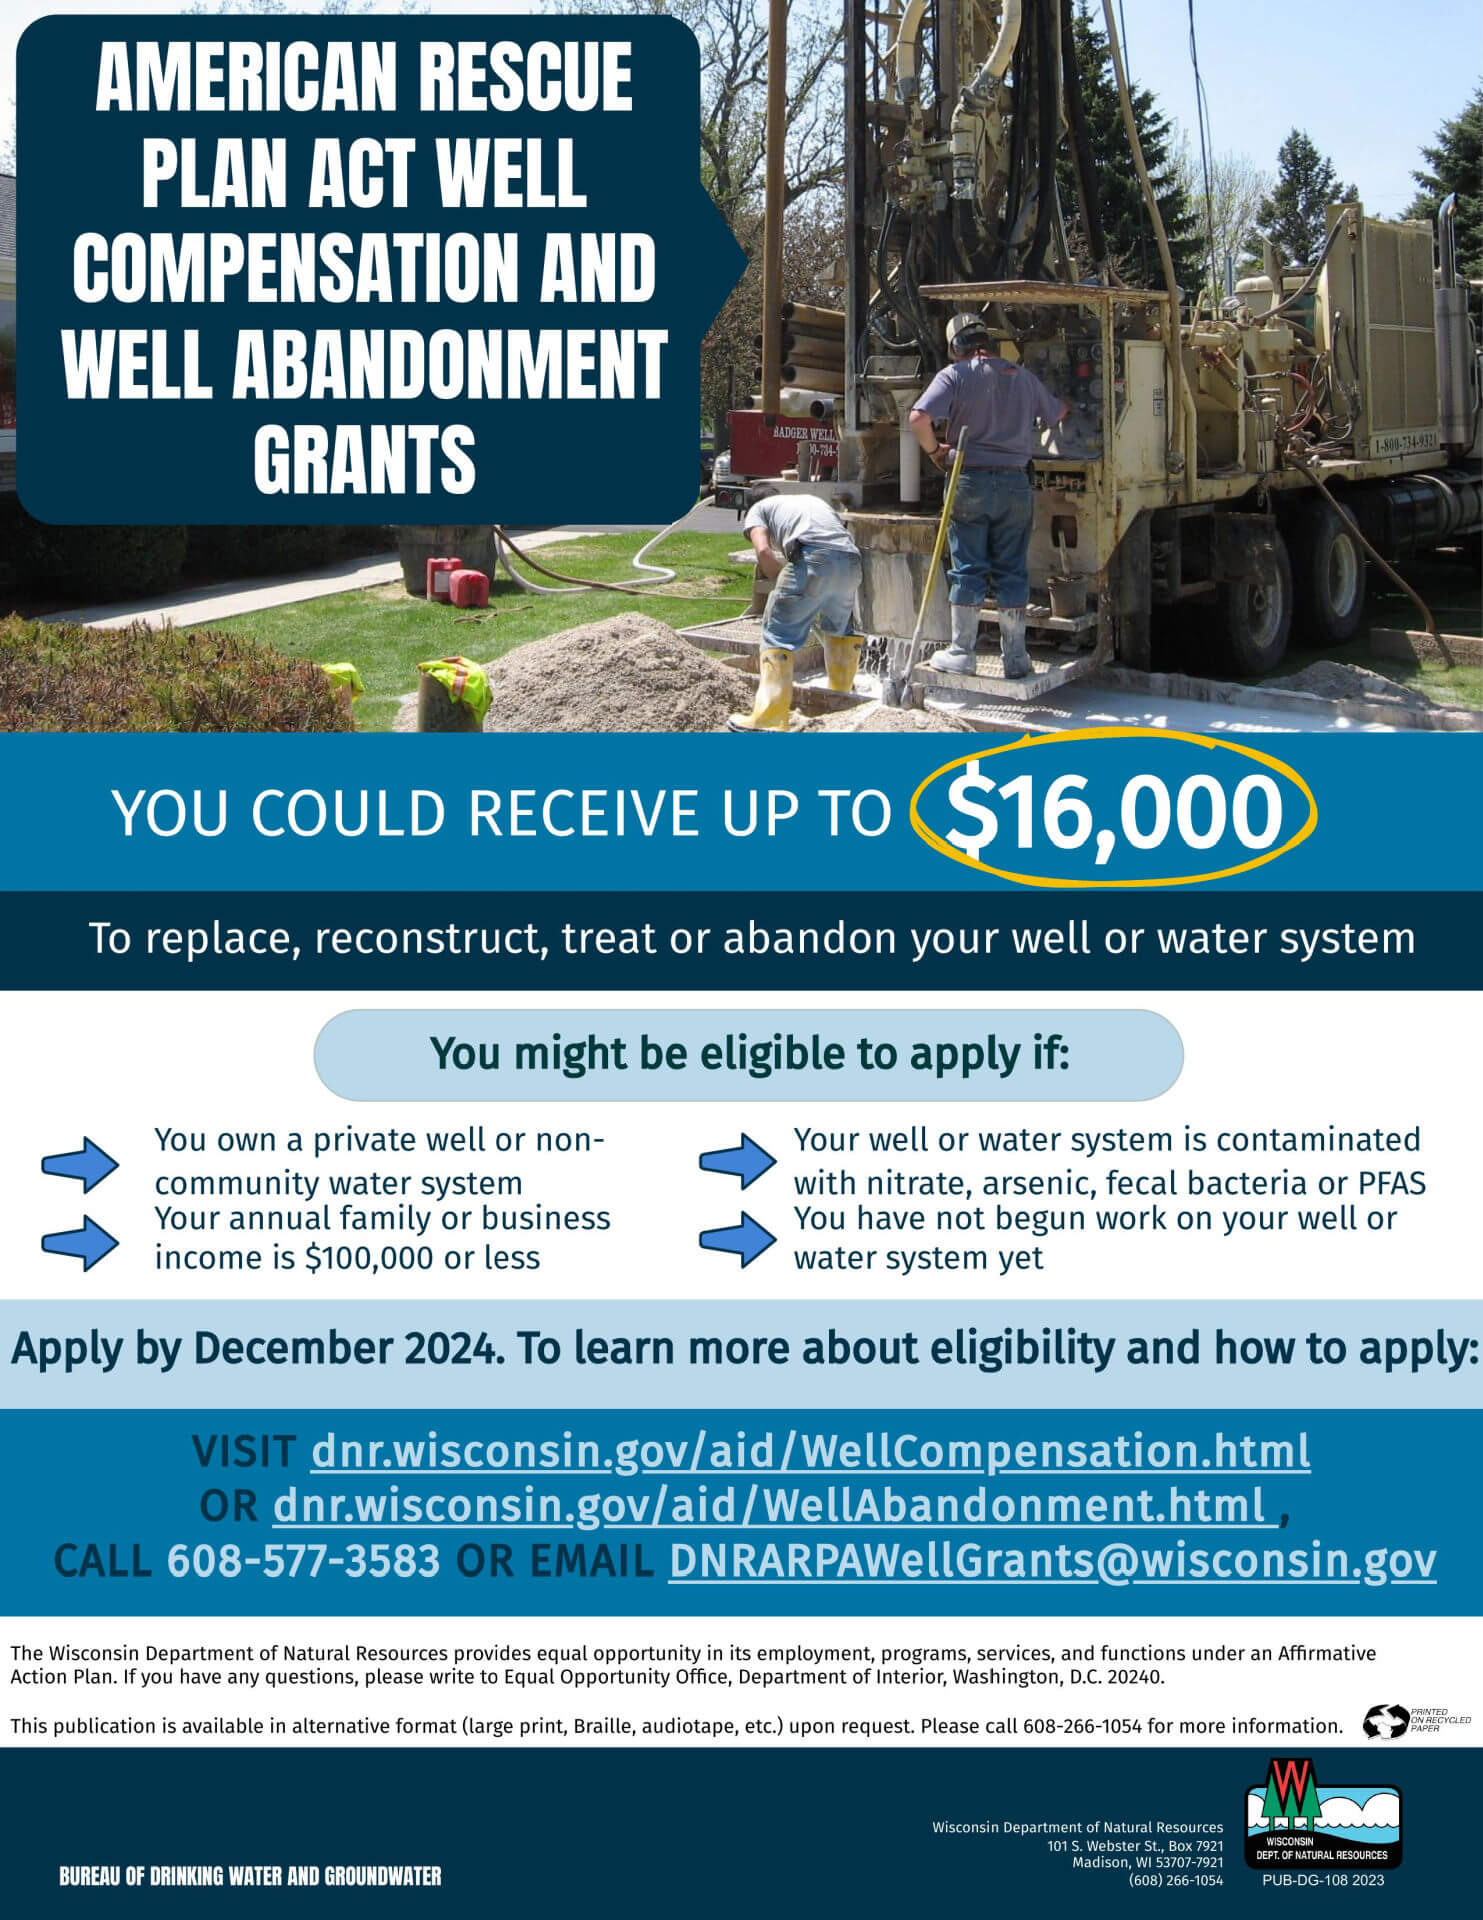 American Rescue Plan Act Well Compensation and Well Abandonment Grants flier